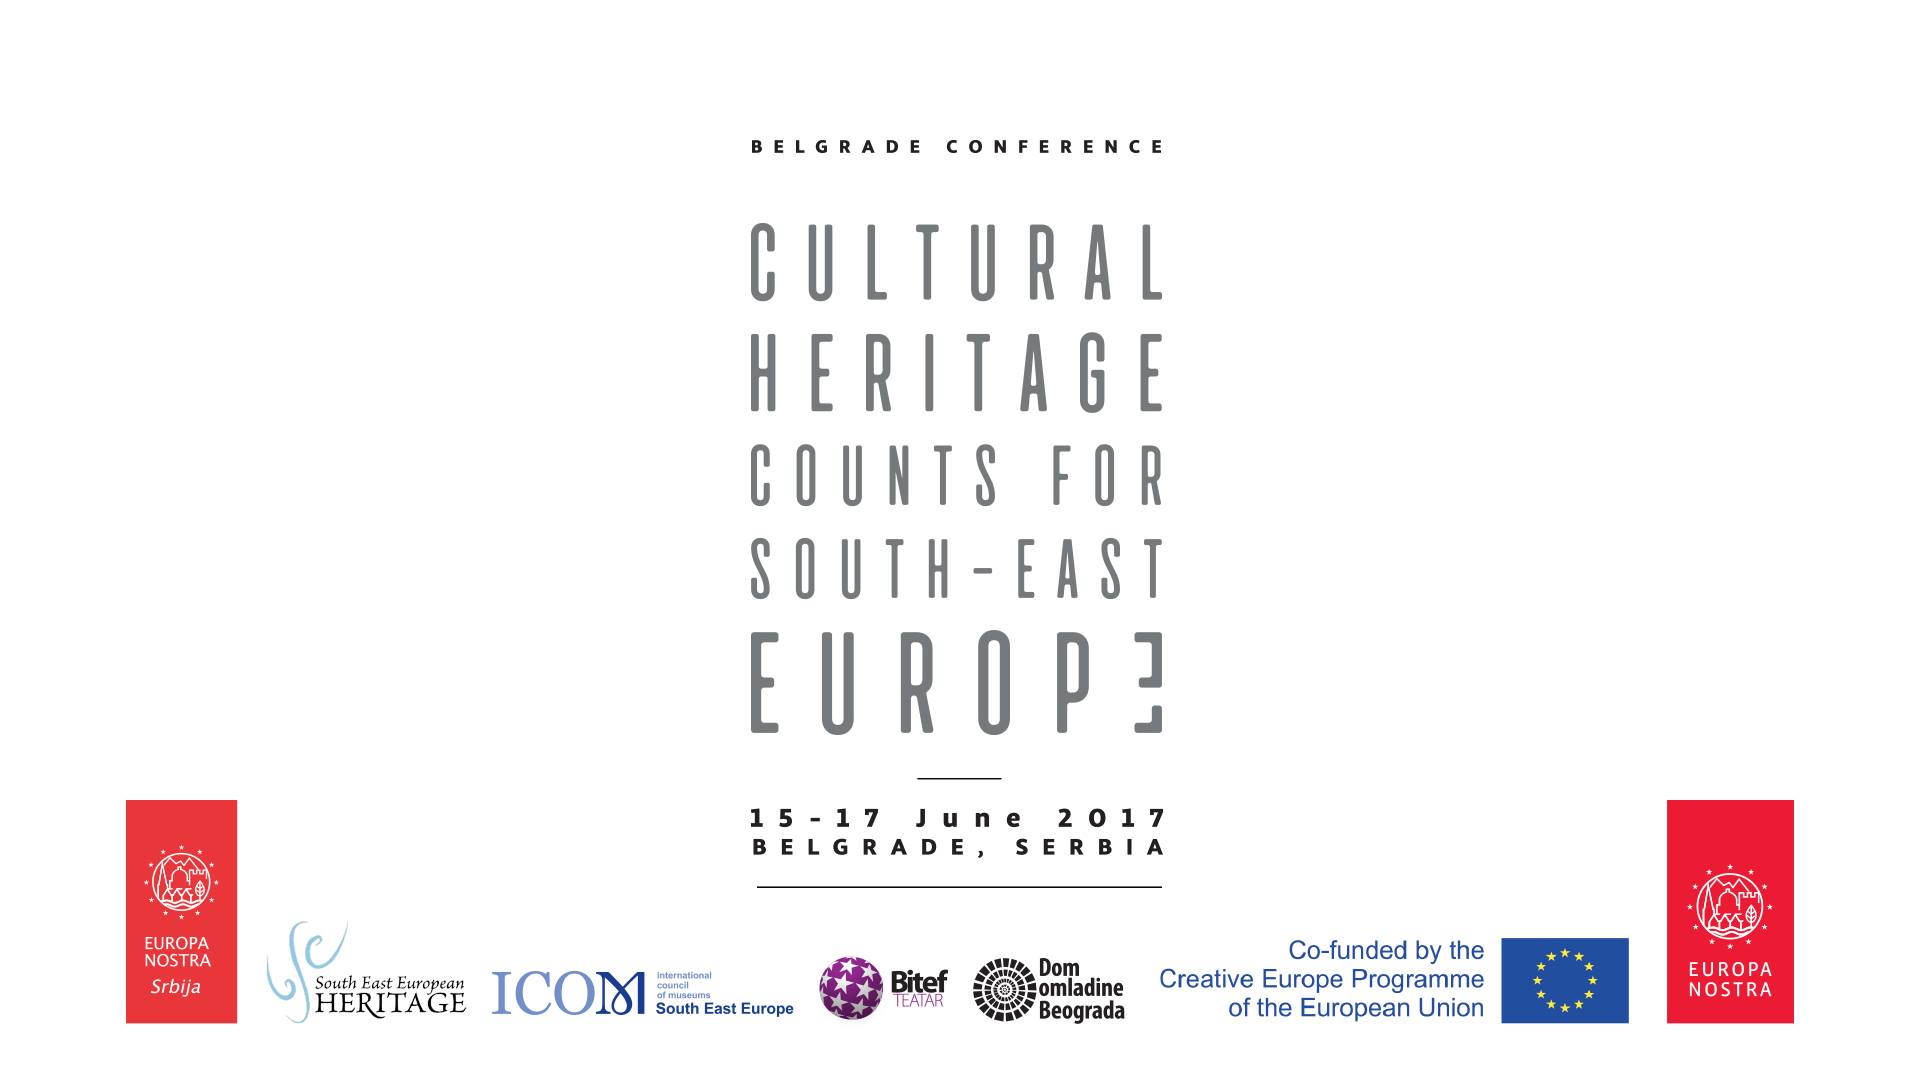 Cultural Heritage Counts for (South-East) Europe Conference - Europa Nostra